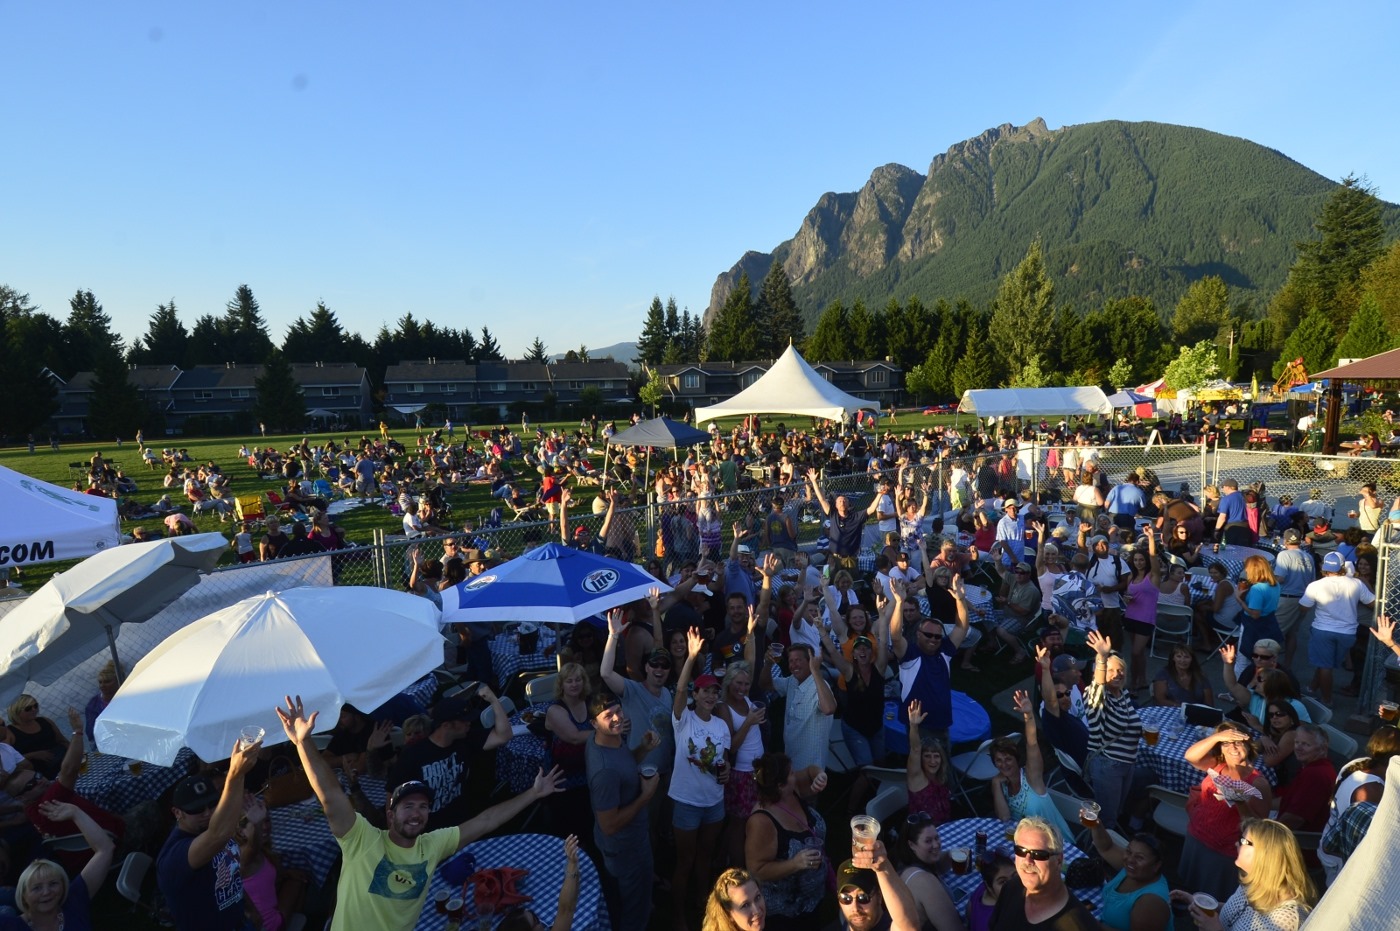 North Bend’s Festival at Mt. Si Kicks off on August 13th Living